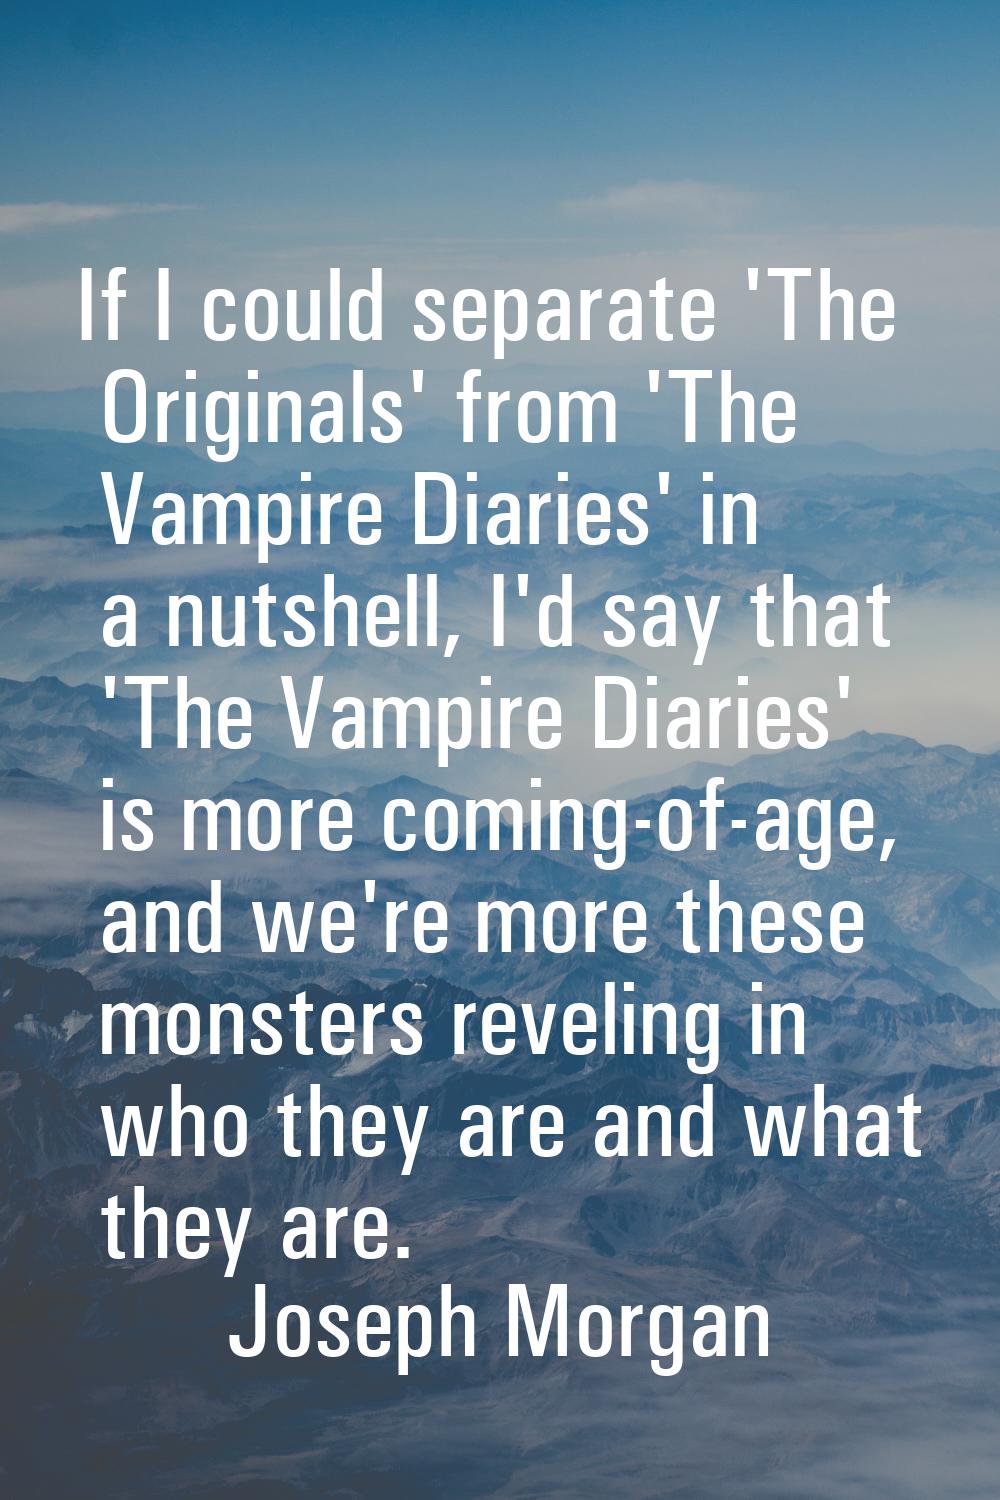 If I could separate 'The Originals' from 'The Vampire Diaries' in a nutshell, I'd say that 'The Vam